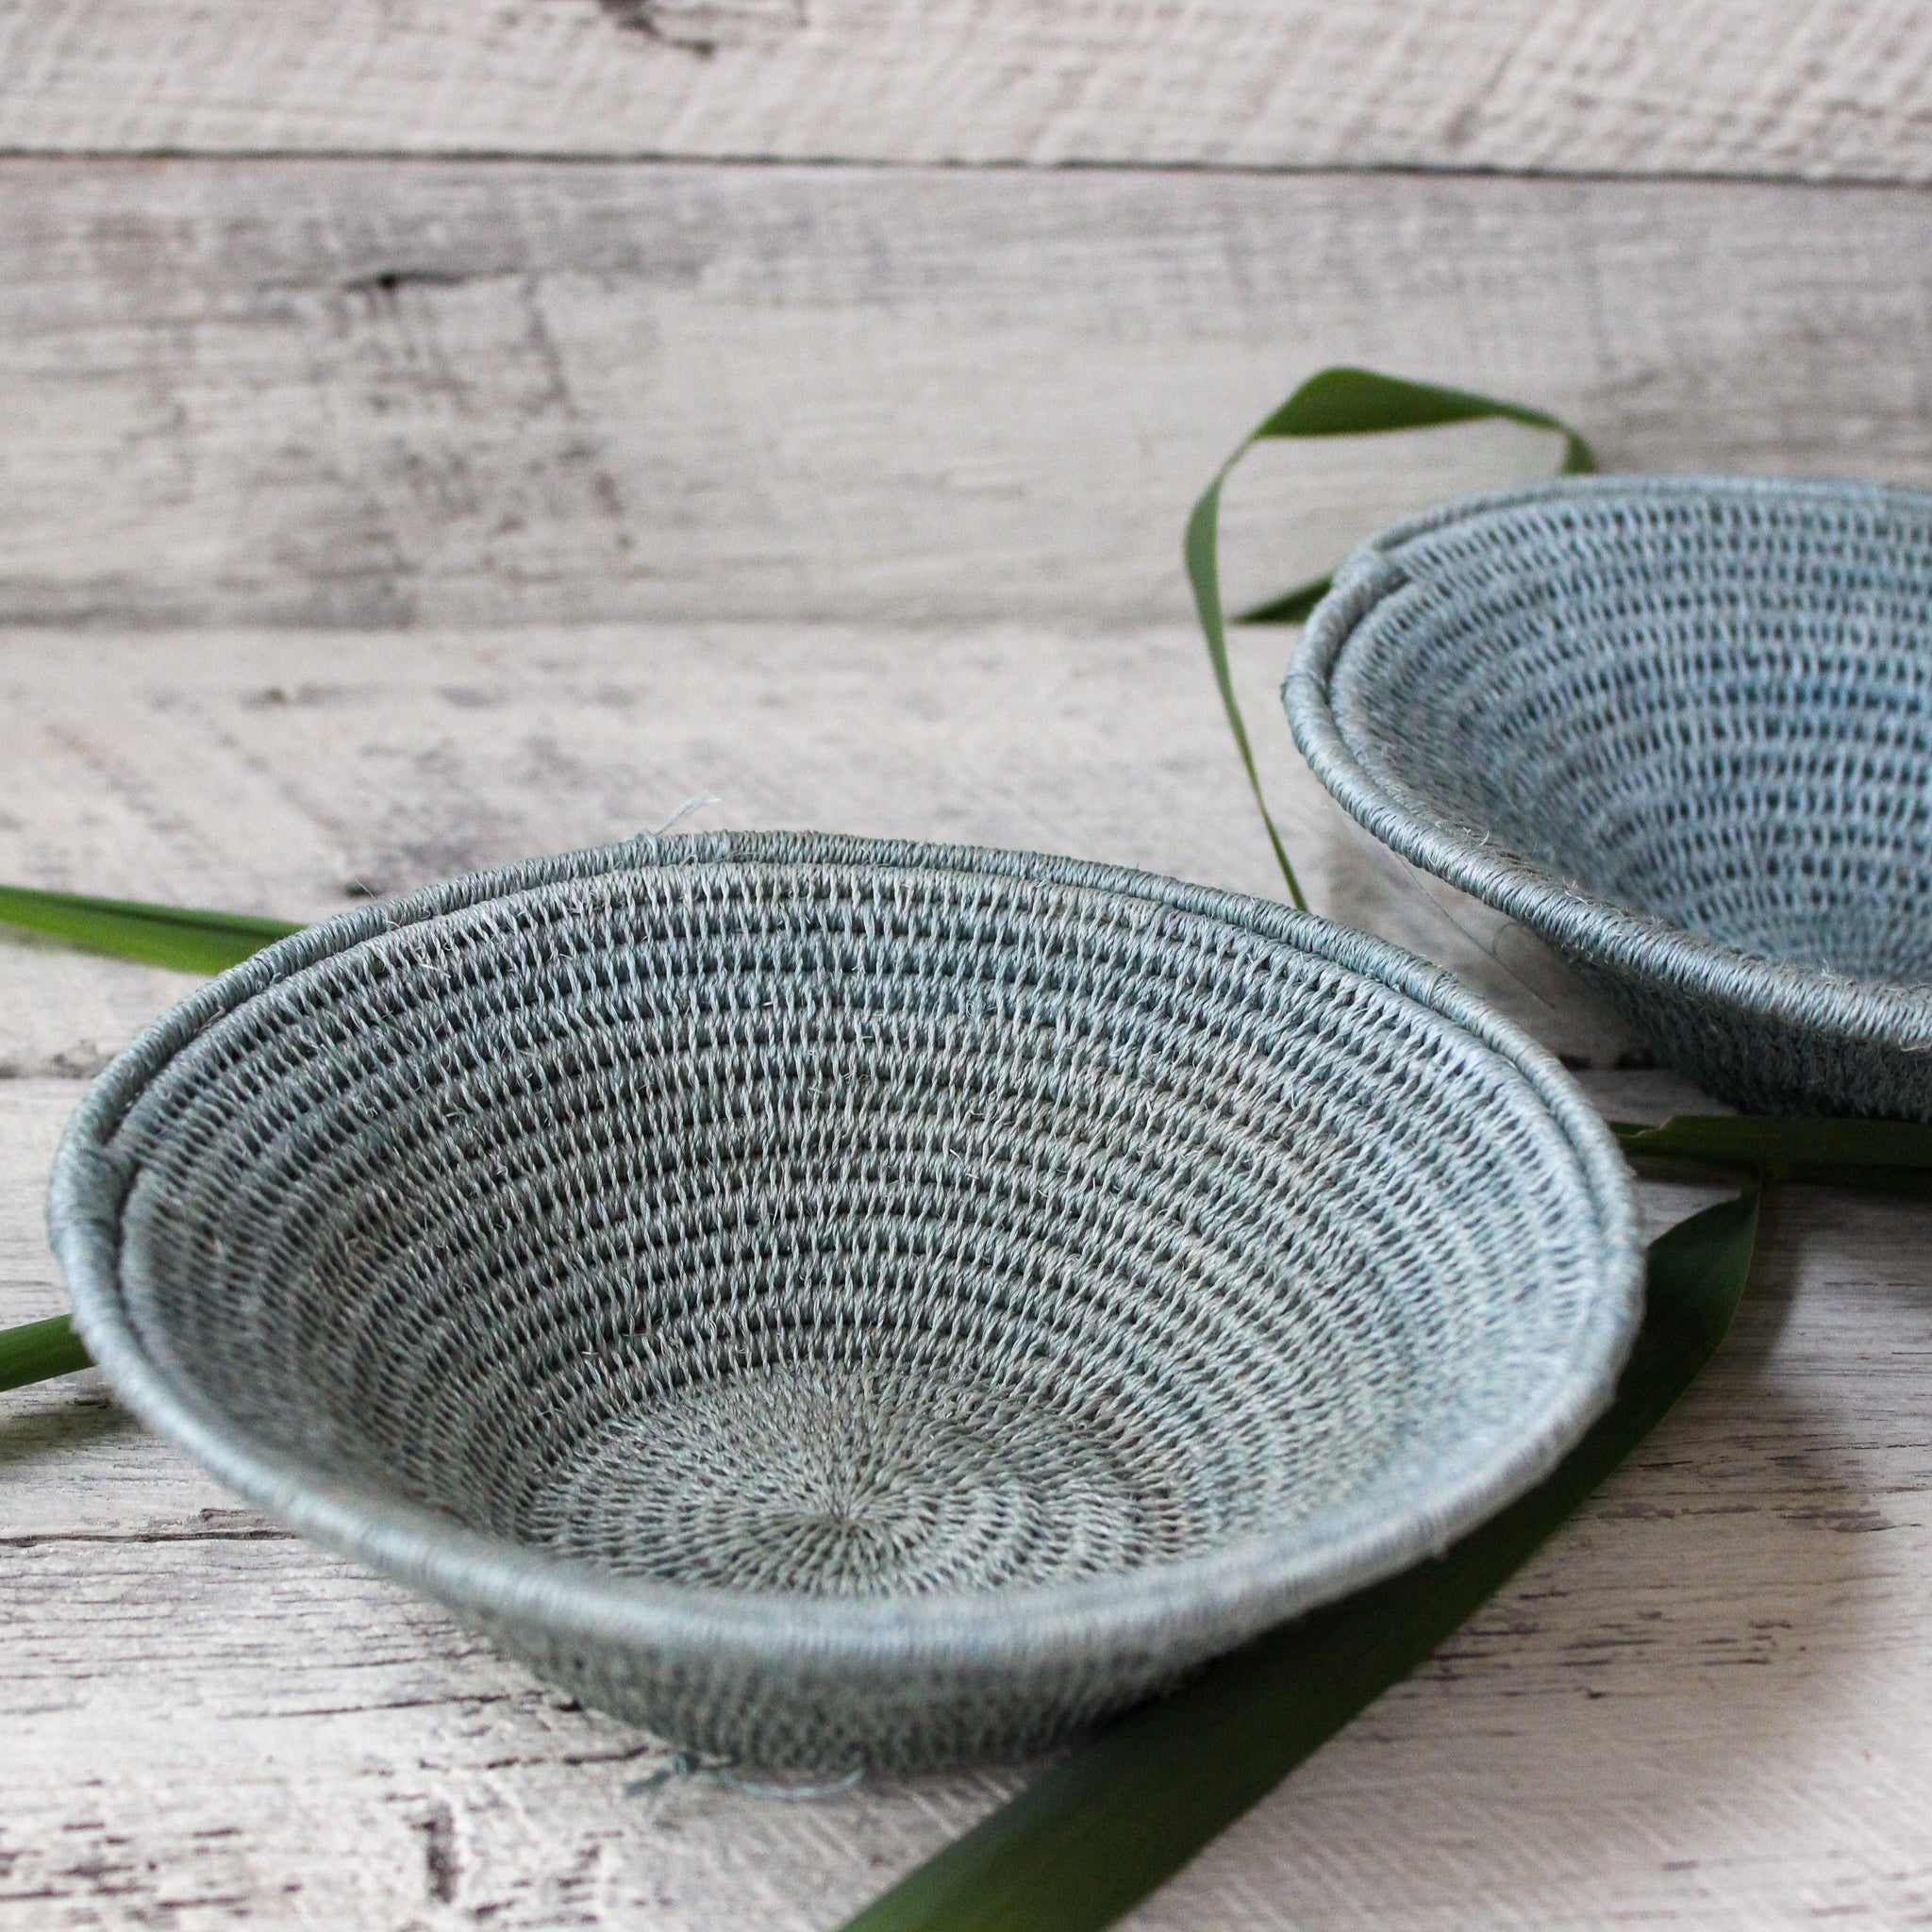 Small Woven Sisal Baskets - Tribe Castlemaine